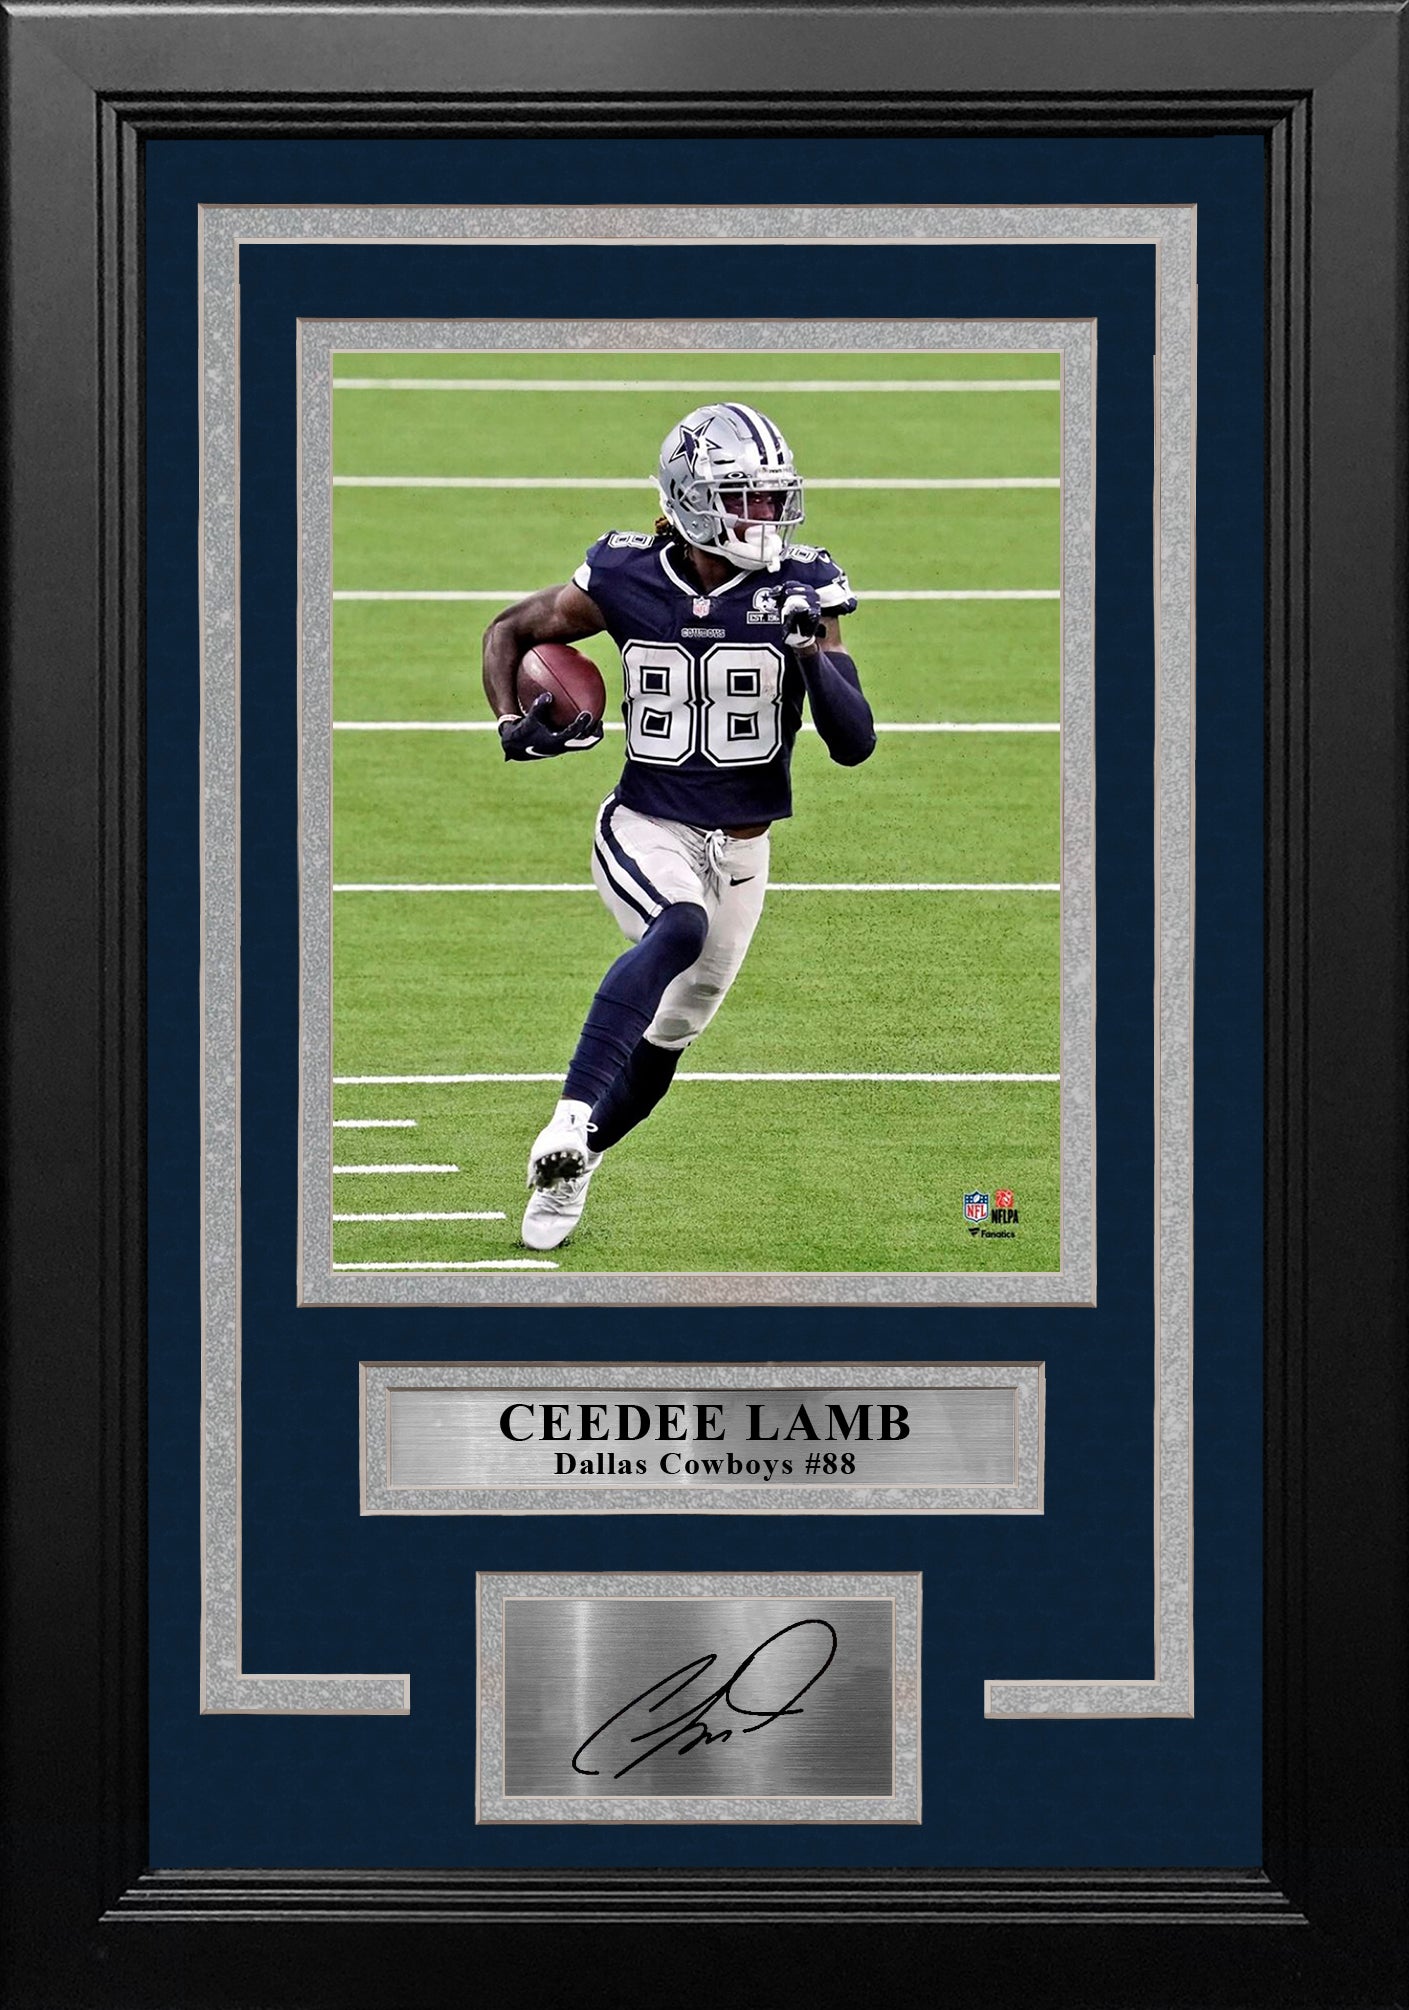 CeeDee Lamb in Action Dallas Cowboys 8' x 10' Framed Football Photo with  Engraved Autograph - Dynasty Sports & Framing